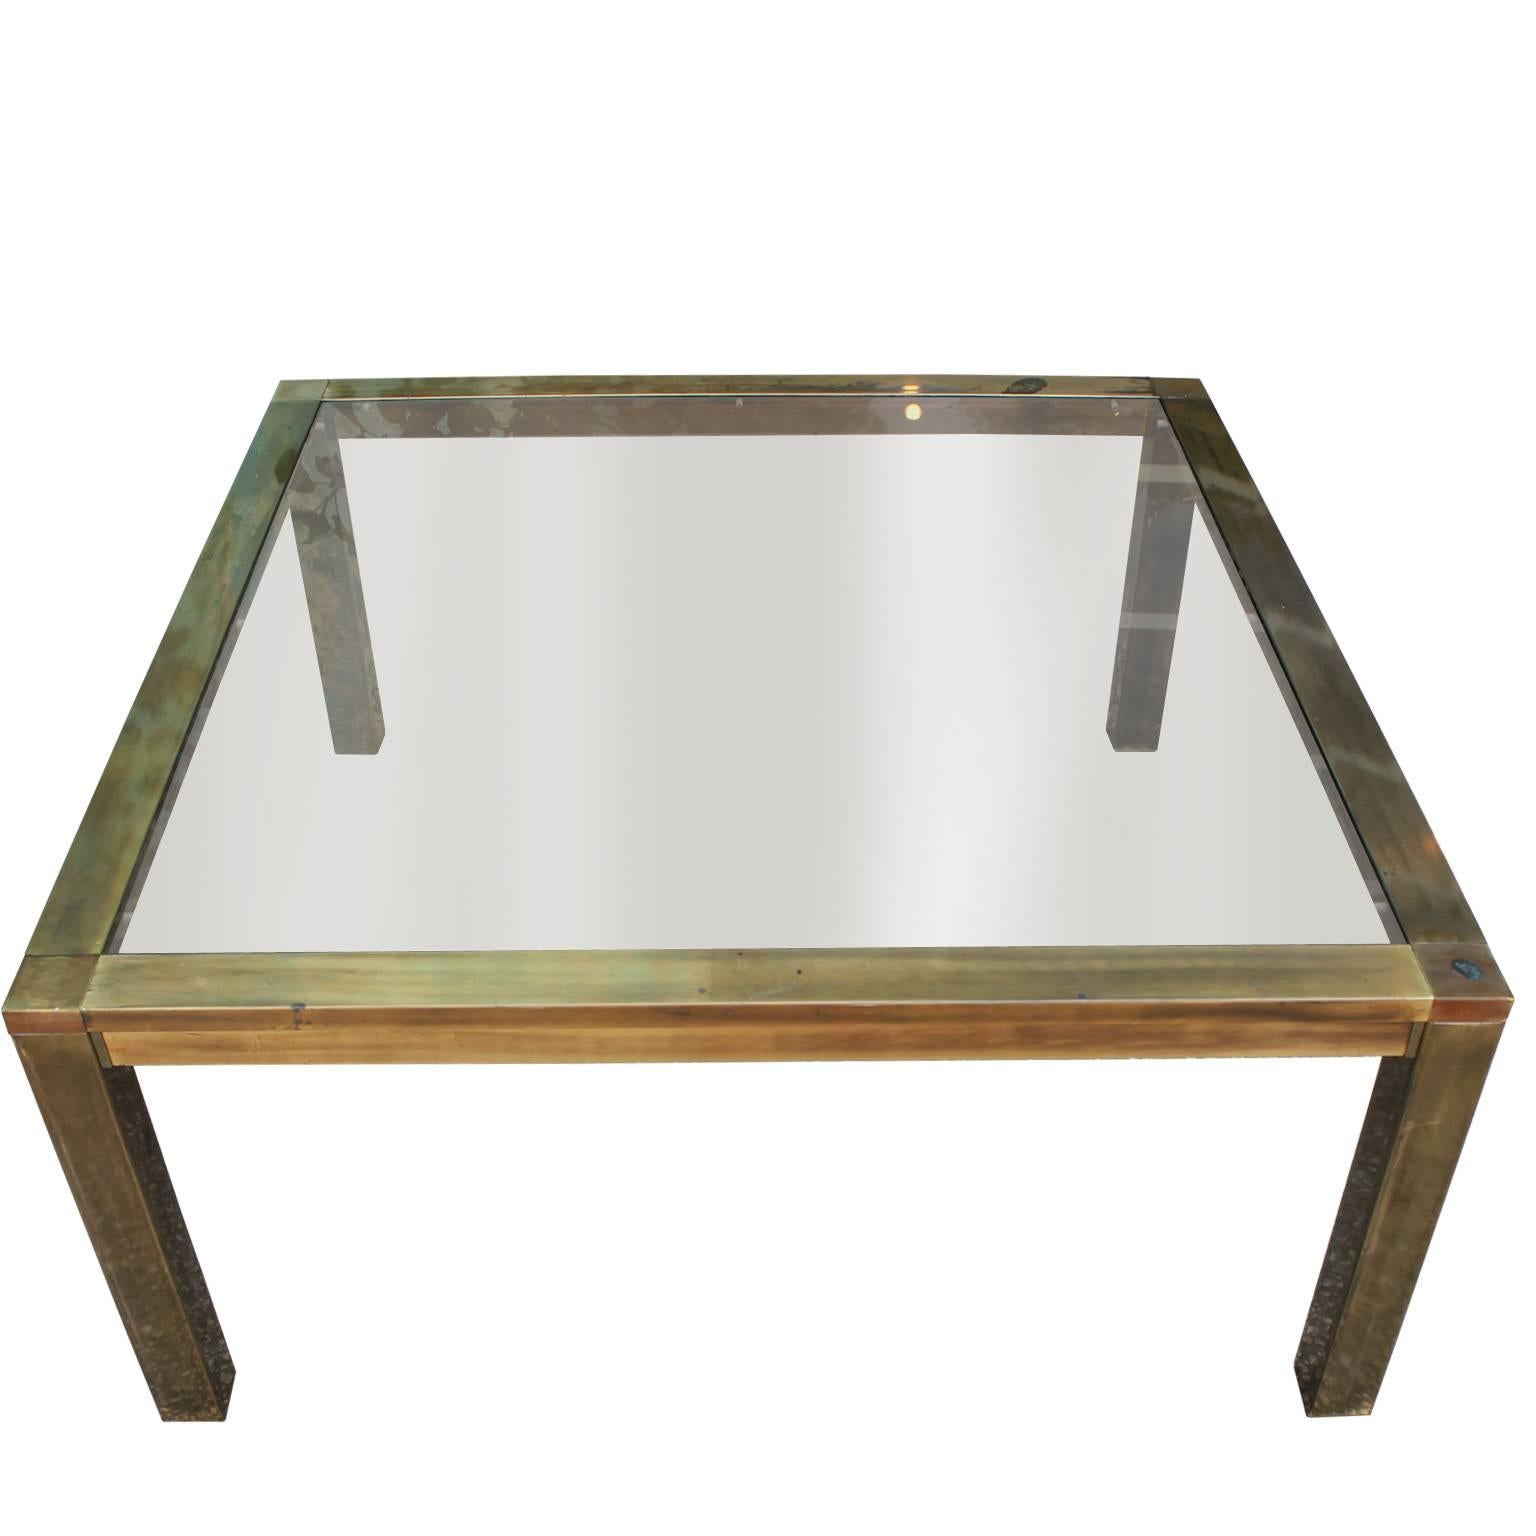 Fabulous Parsons style coffee table attributed to Mastercraft. Brass base has a wonderful patina. Smoked glass top. Perfect in a modern, transitional, Mid-Century or Hollywood Regency space.